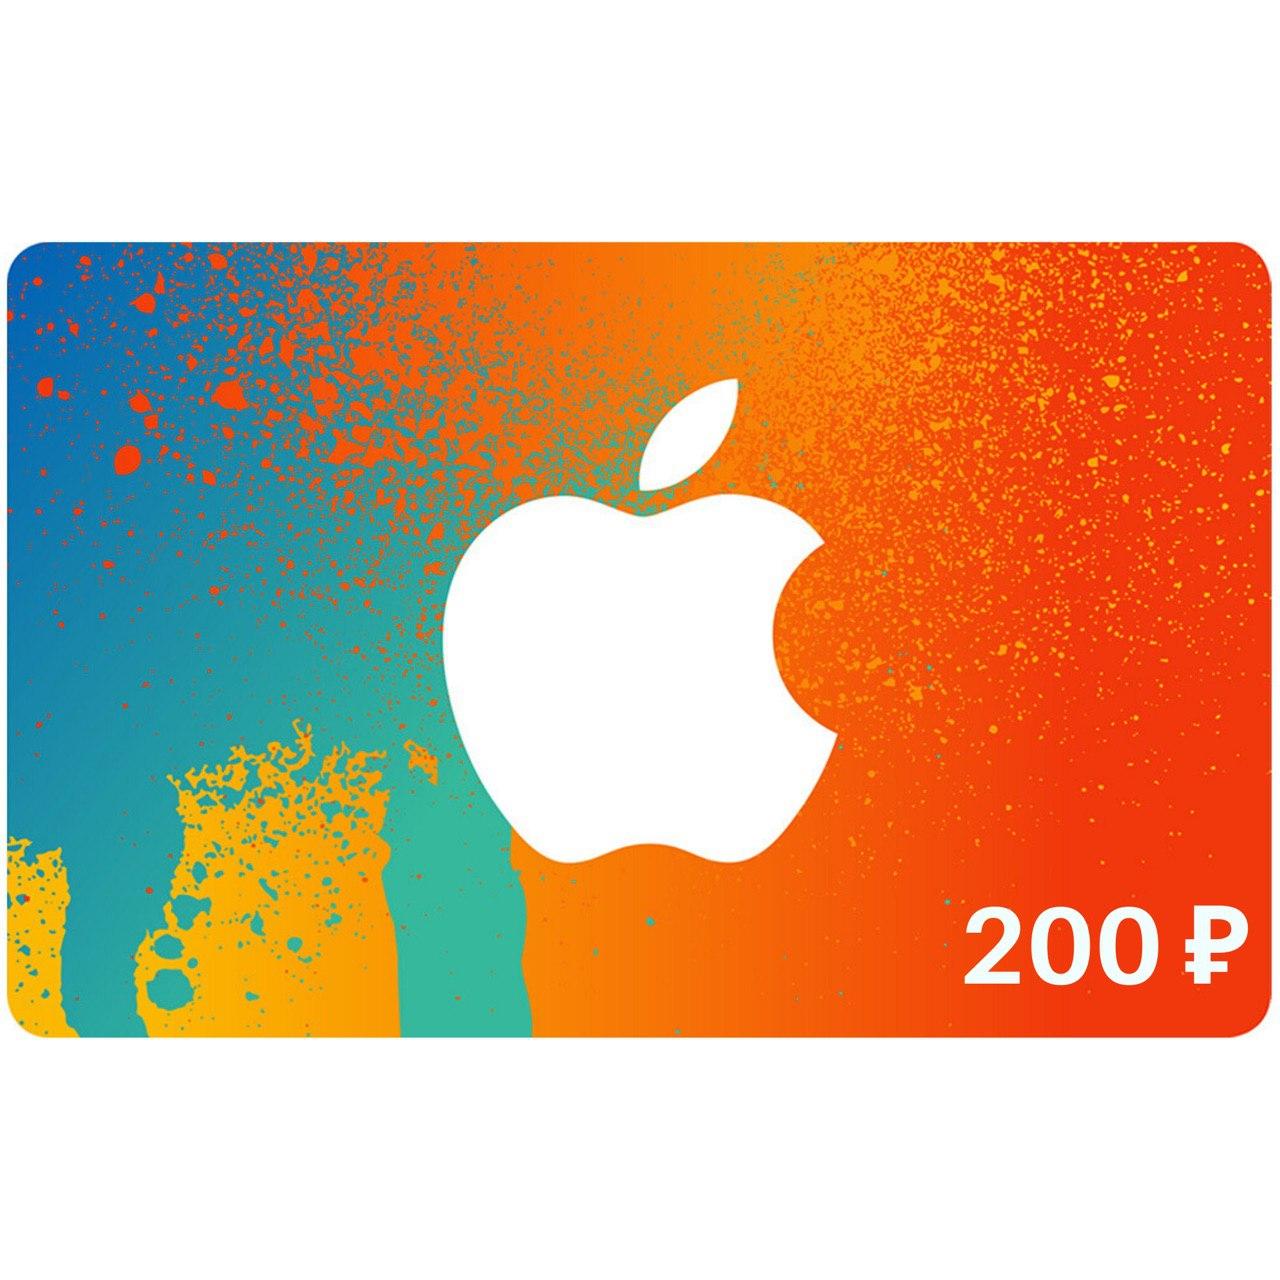 Apple store itunes карта. ITUNES Gift Card. Карта ITUNES. Гифт карта ITUNES. Apple Gift Card.